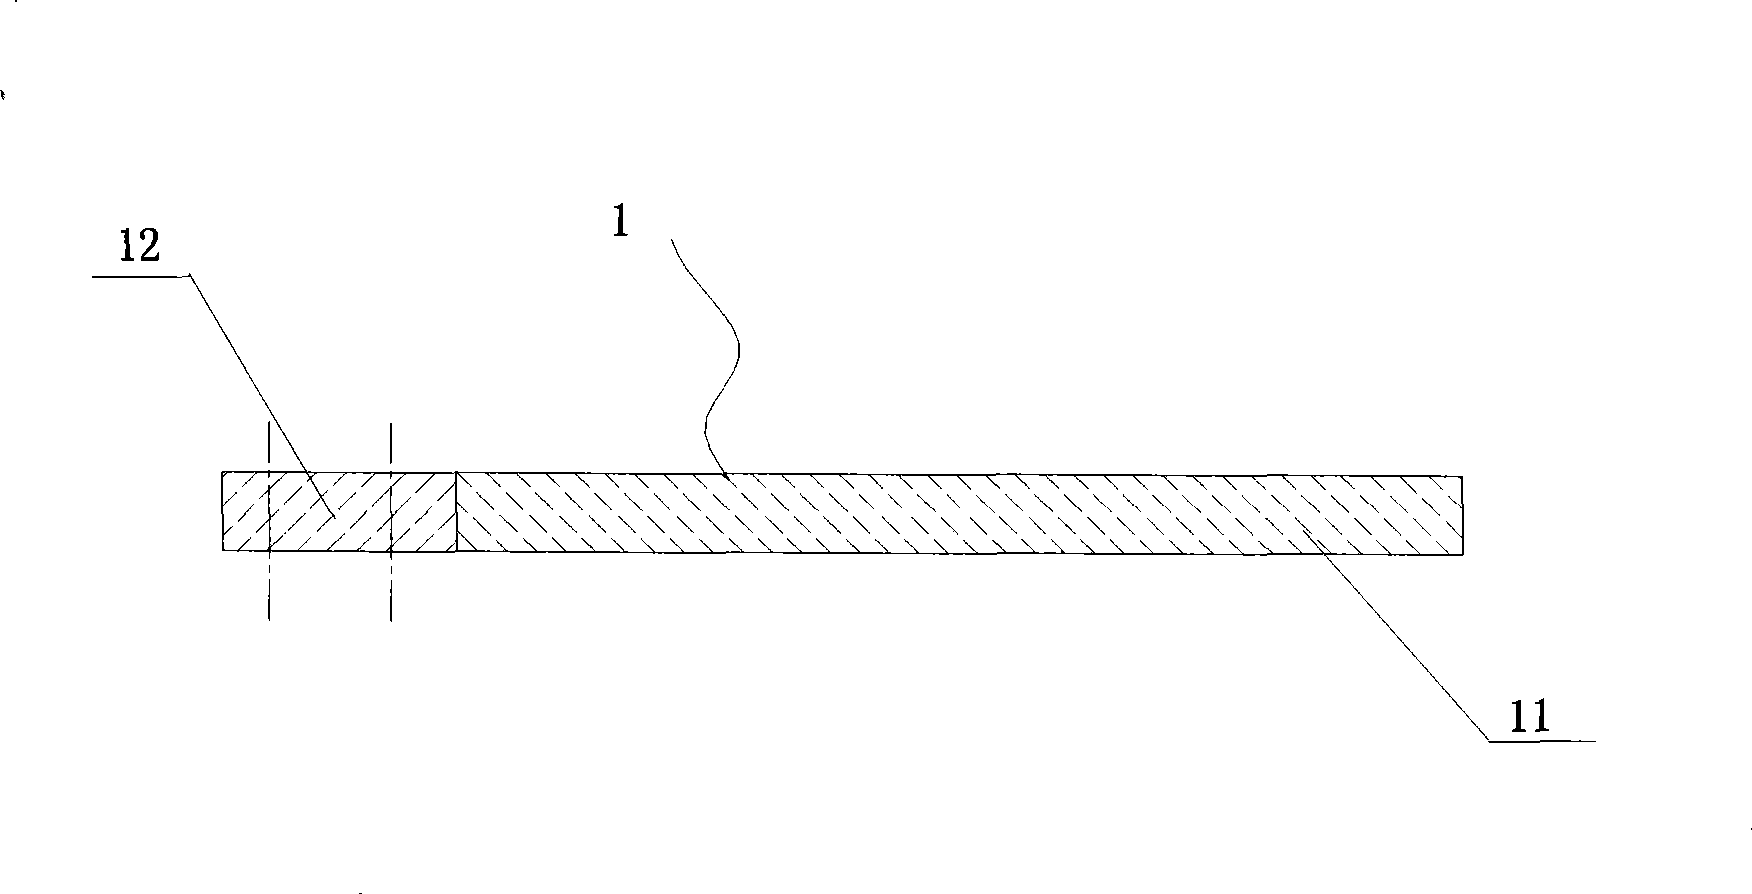 Structure of amorphous alloy dry-type distribution transformer and manufacturing method thereof